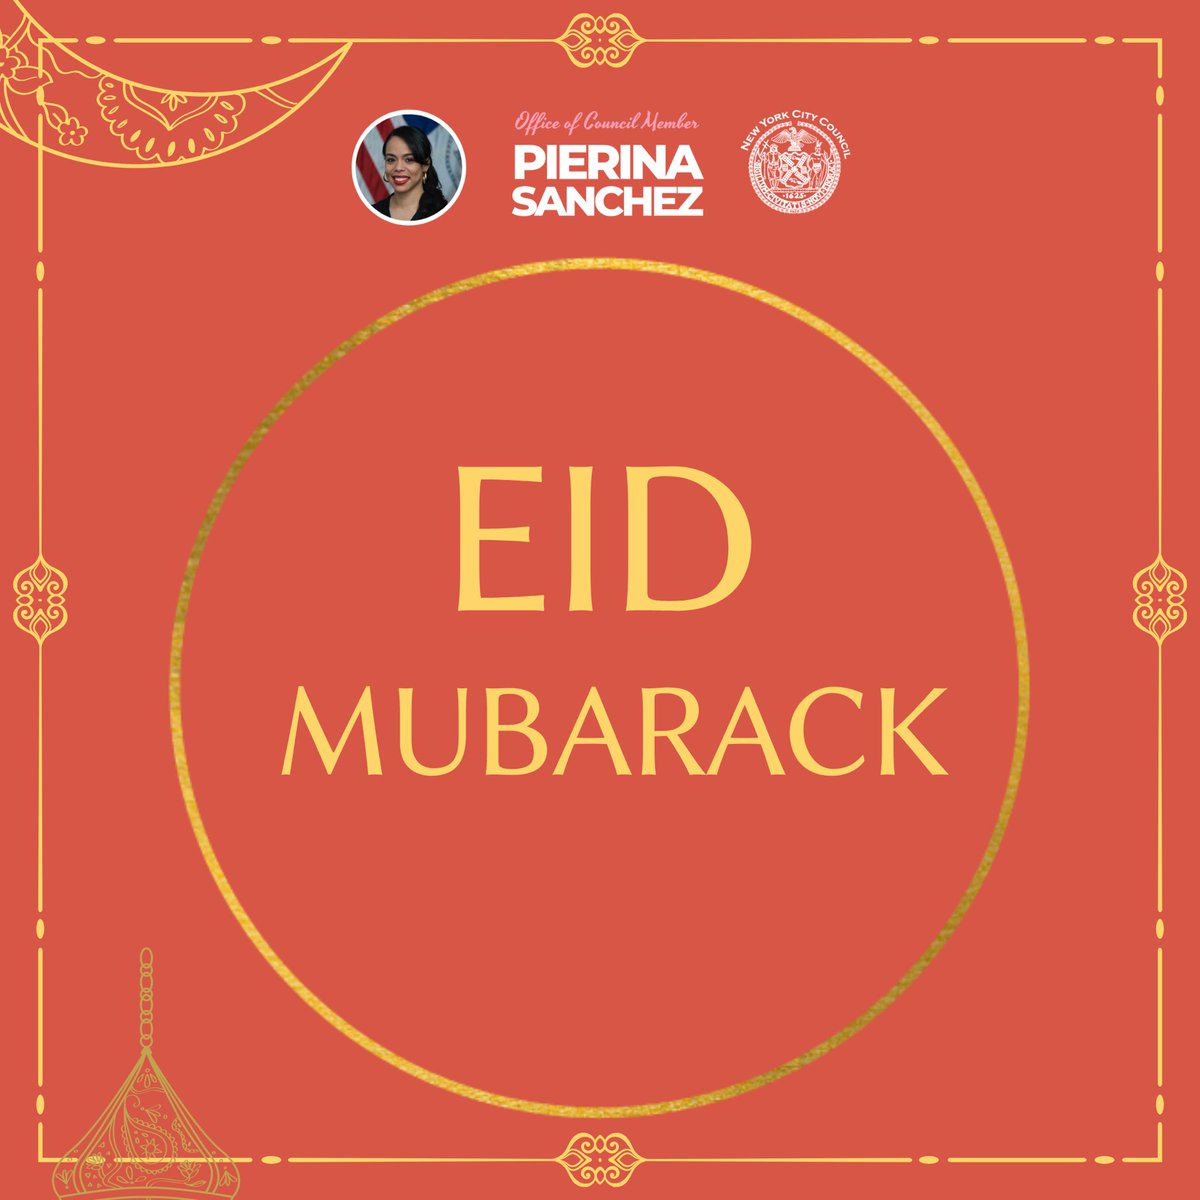 Eid Mubarak to all celebrating Eid al-Fitr! 🌙✨ Wishing you and your loved ones joy, peace, and prosperity as you mark the end of Ramadan. May this special day be filled with blessings and happiness.